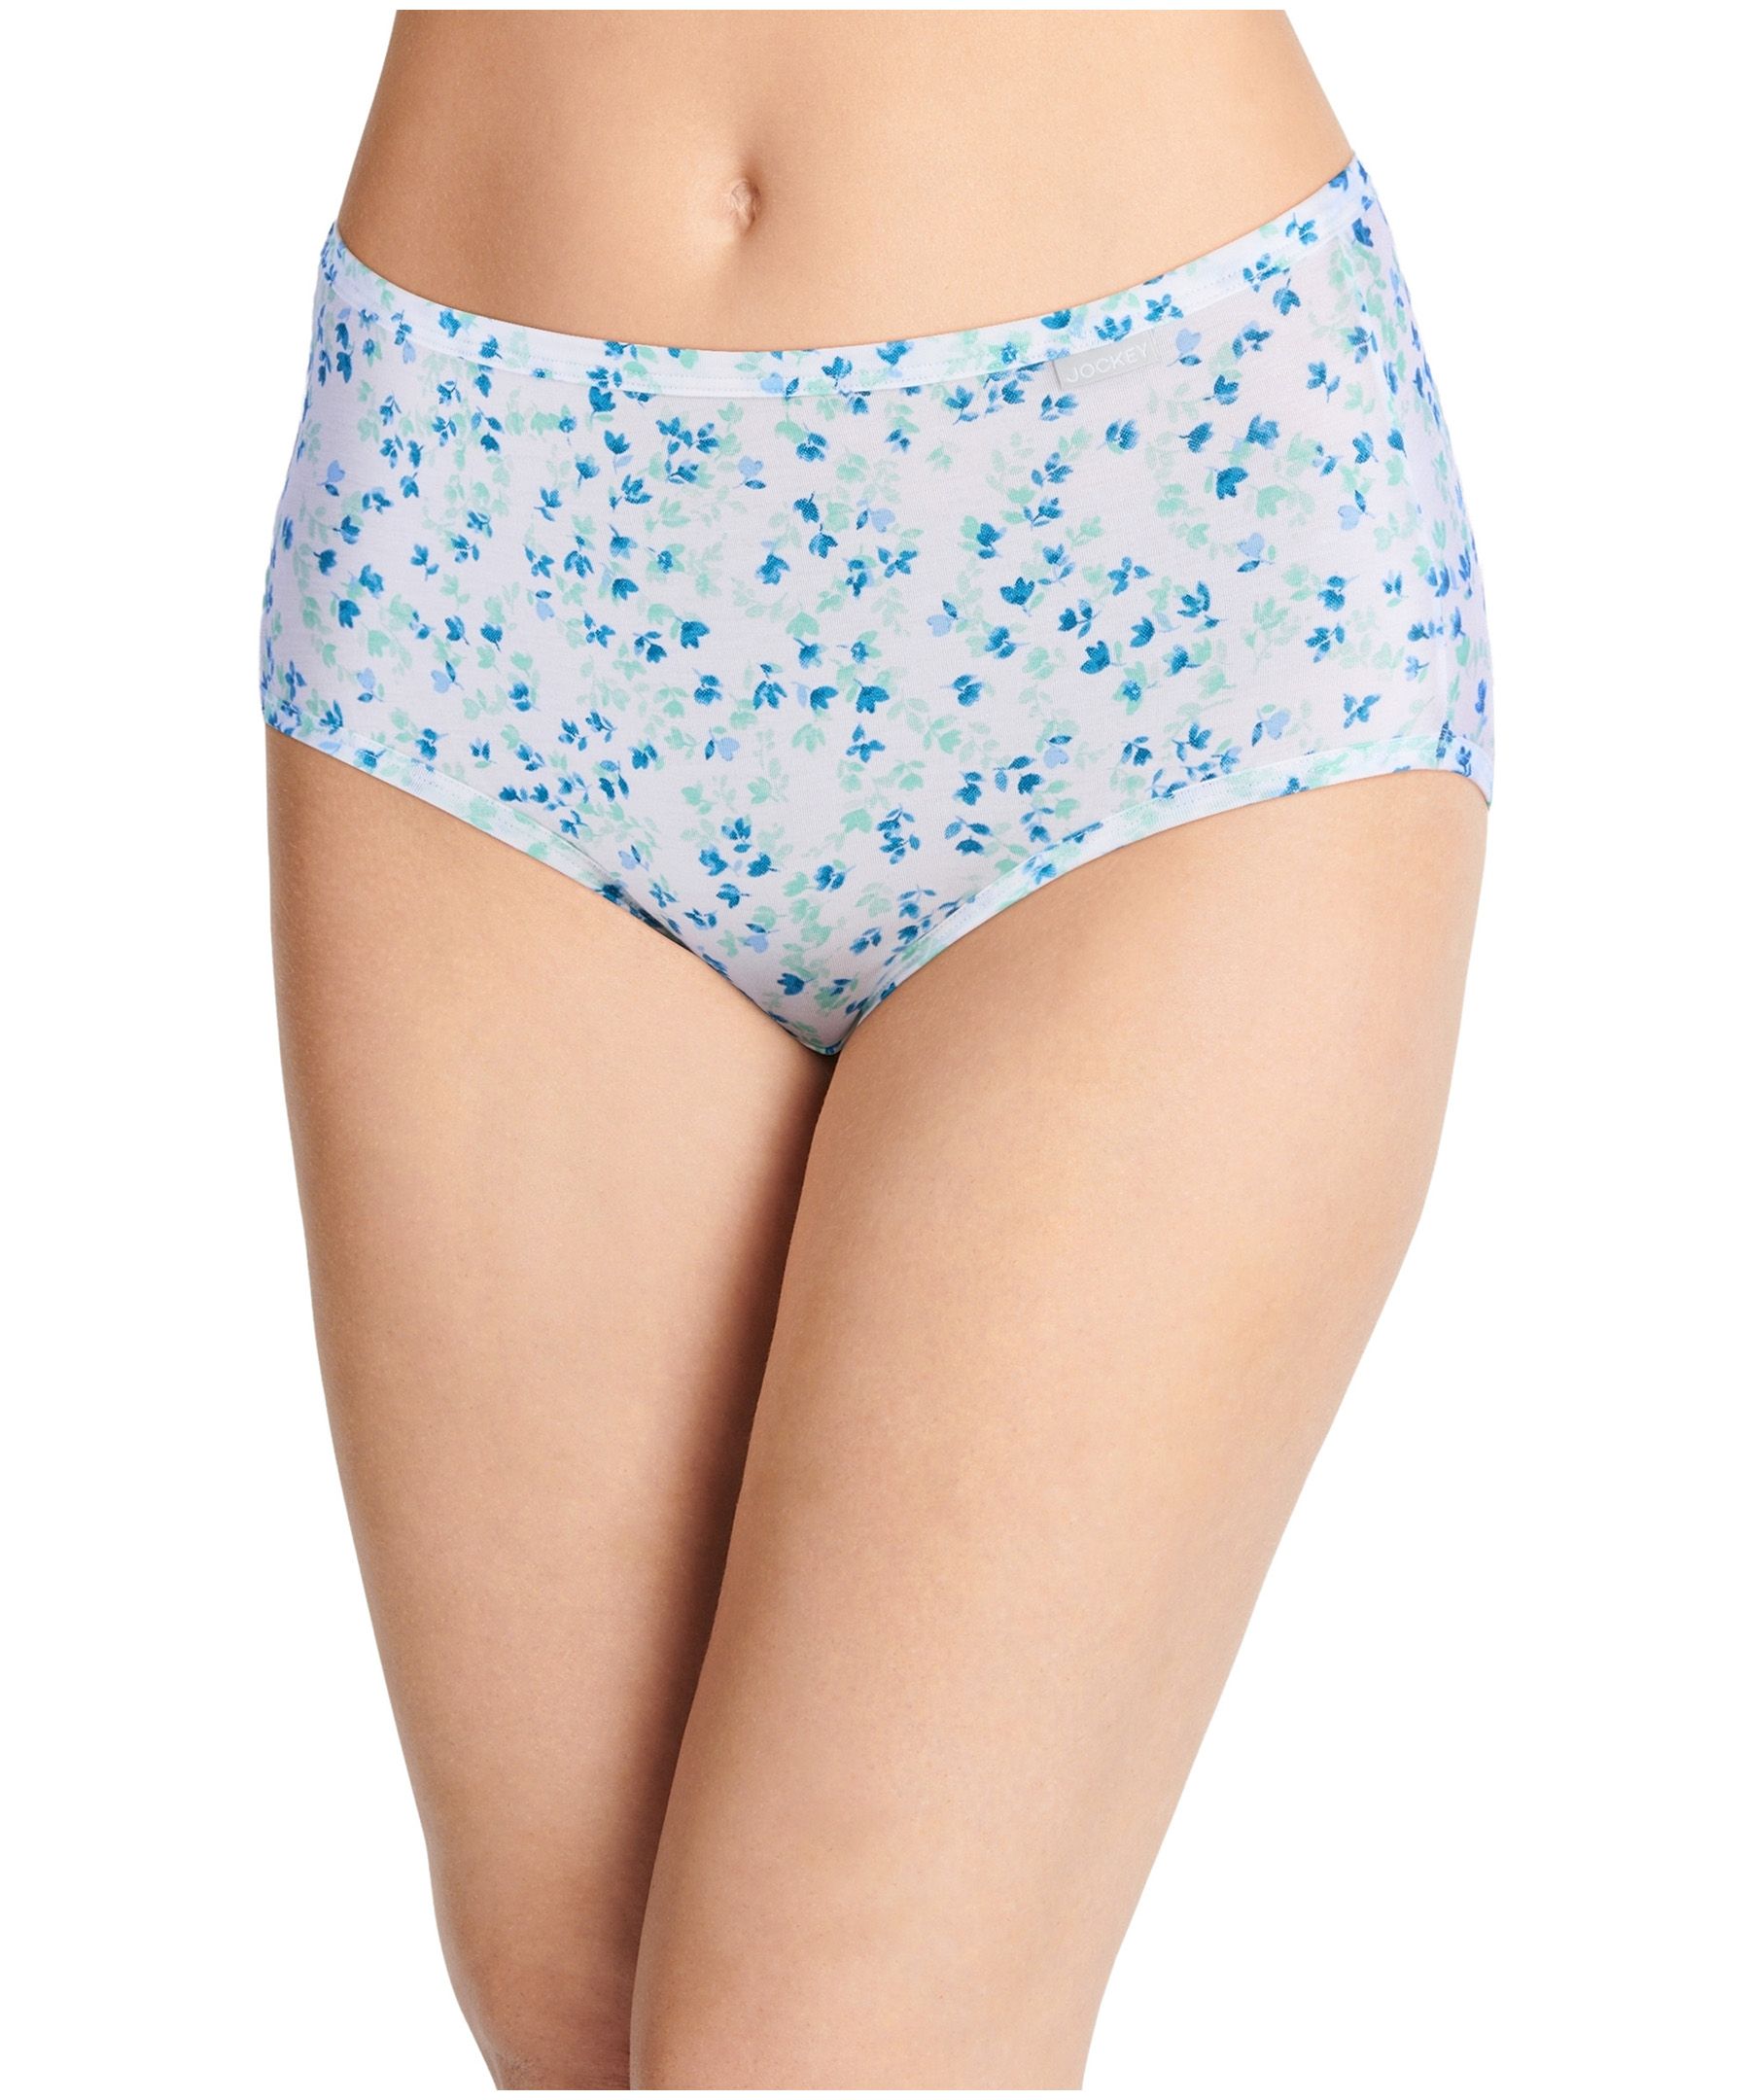 https://media-www.marks.com/product/marks-work-wearhouse/ladies-world/ladies-accessories/410037679689/jockey-women-s-3-pack-elance-supersoft-underwear-french-cut-panties-3a39e5e8-f900-4366-ba41-ace500ef40d9-jpgrendition.jpg?imdensity=1&imwidth=1244&impolicy=mZoom